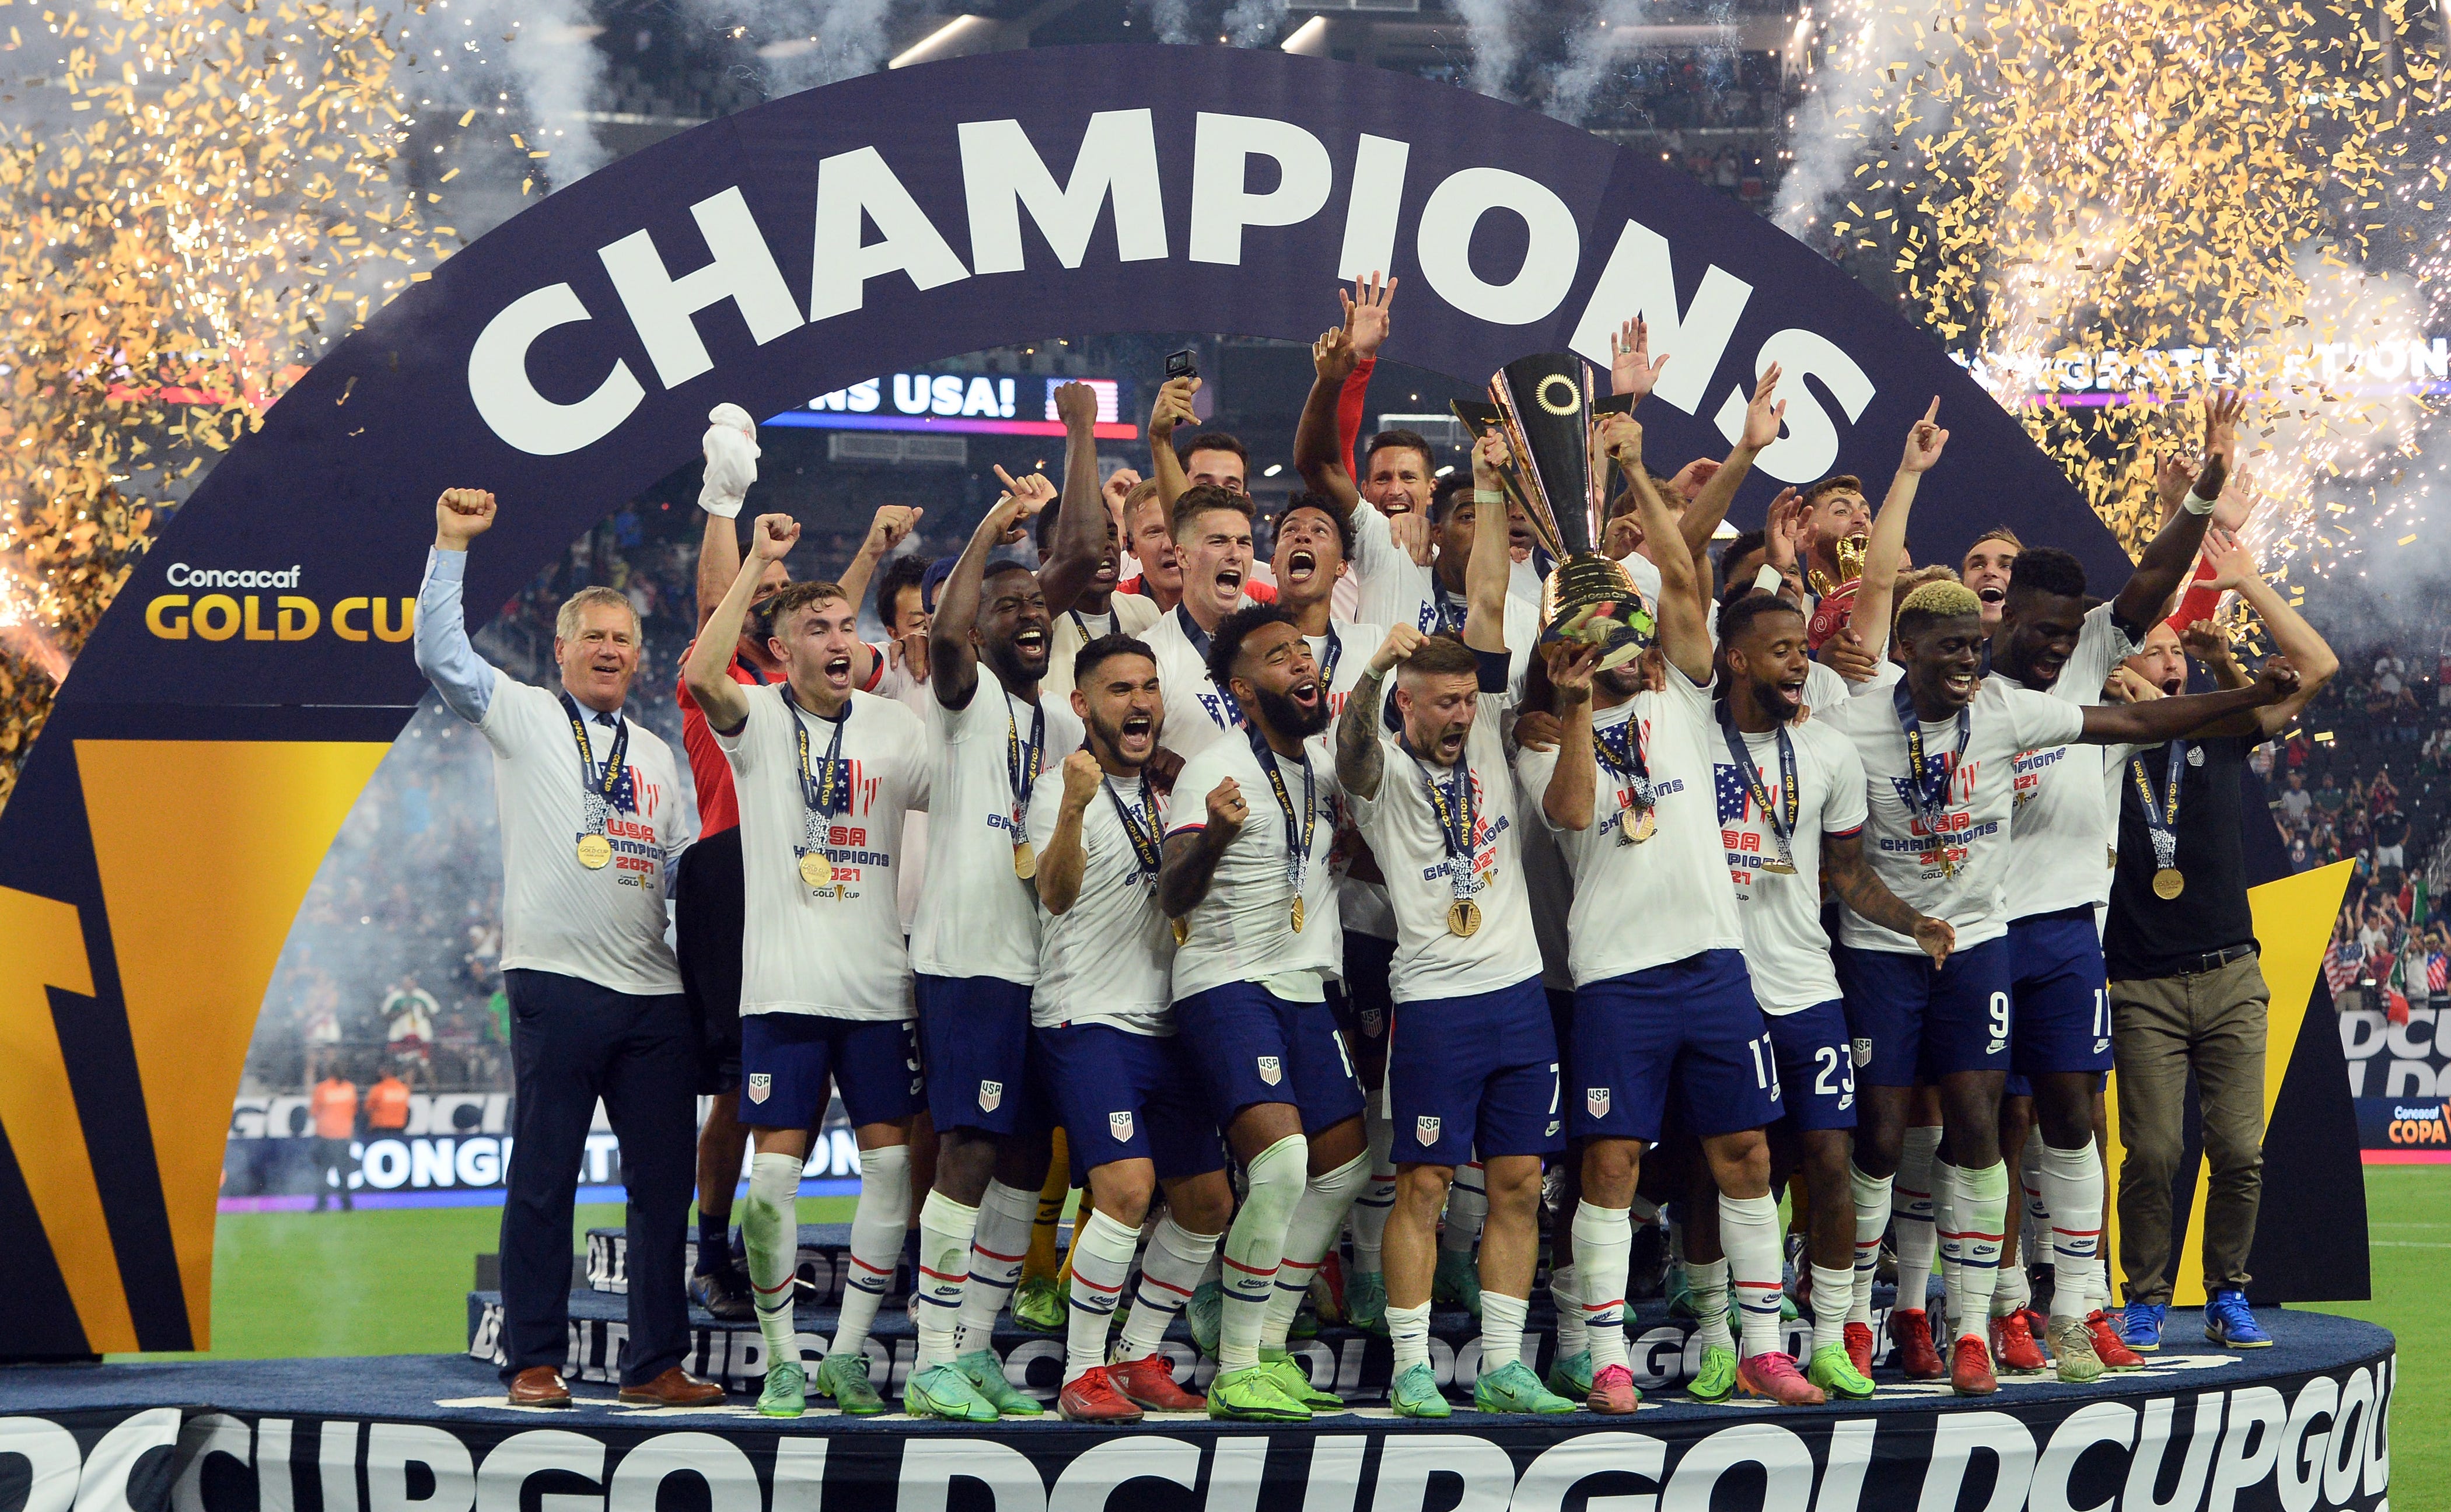 Usmnt Wins Concacaf Gold Cup Defeats Mexico In Final